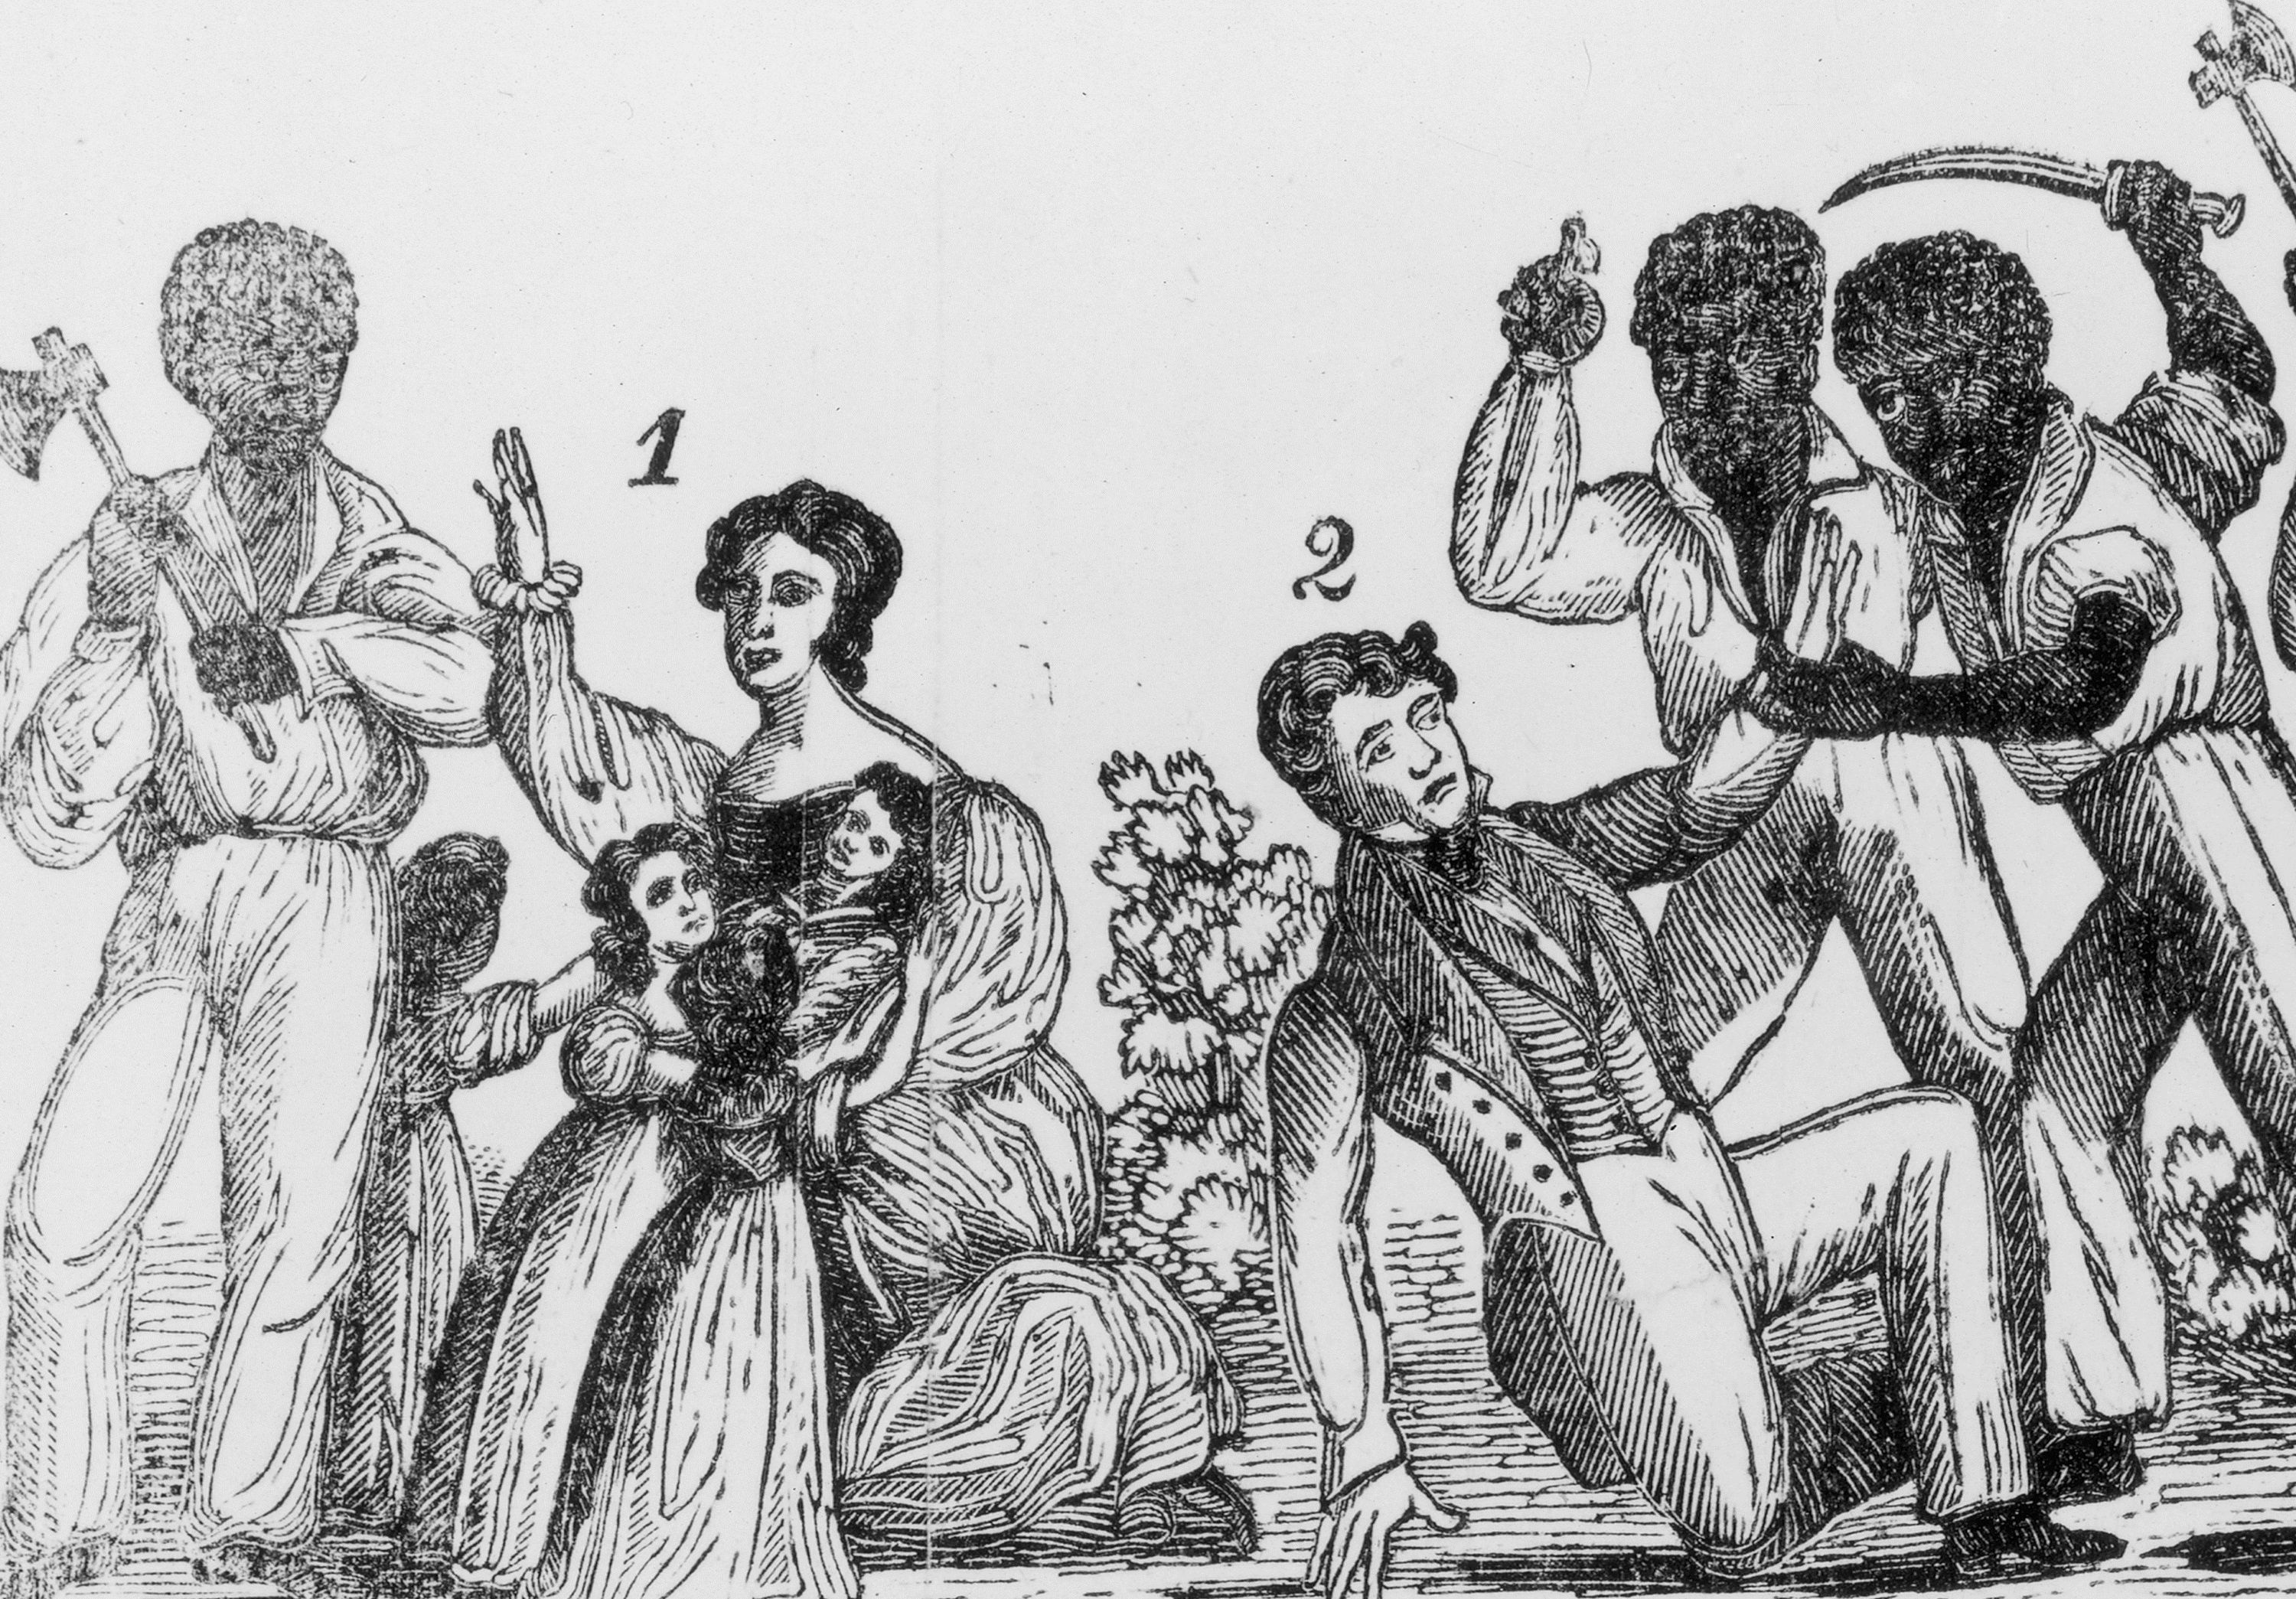 Slavery And Gender Issues Portrayed In American Literature